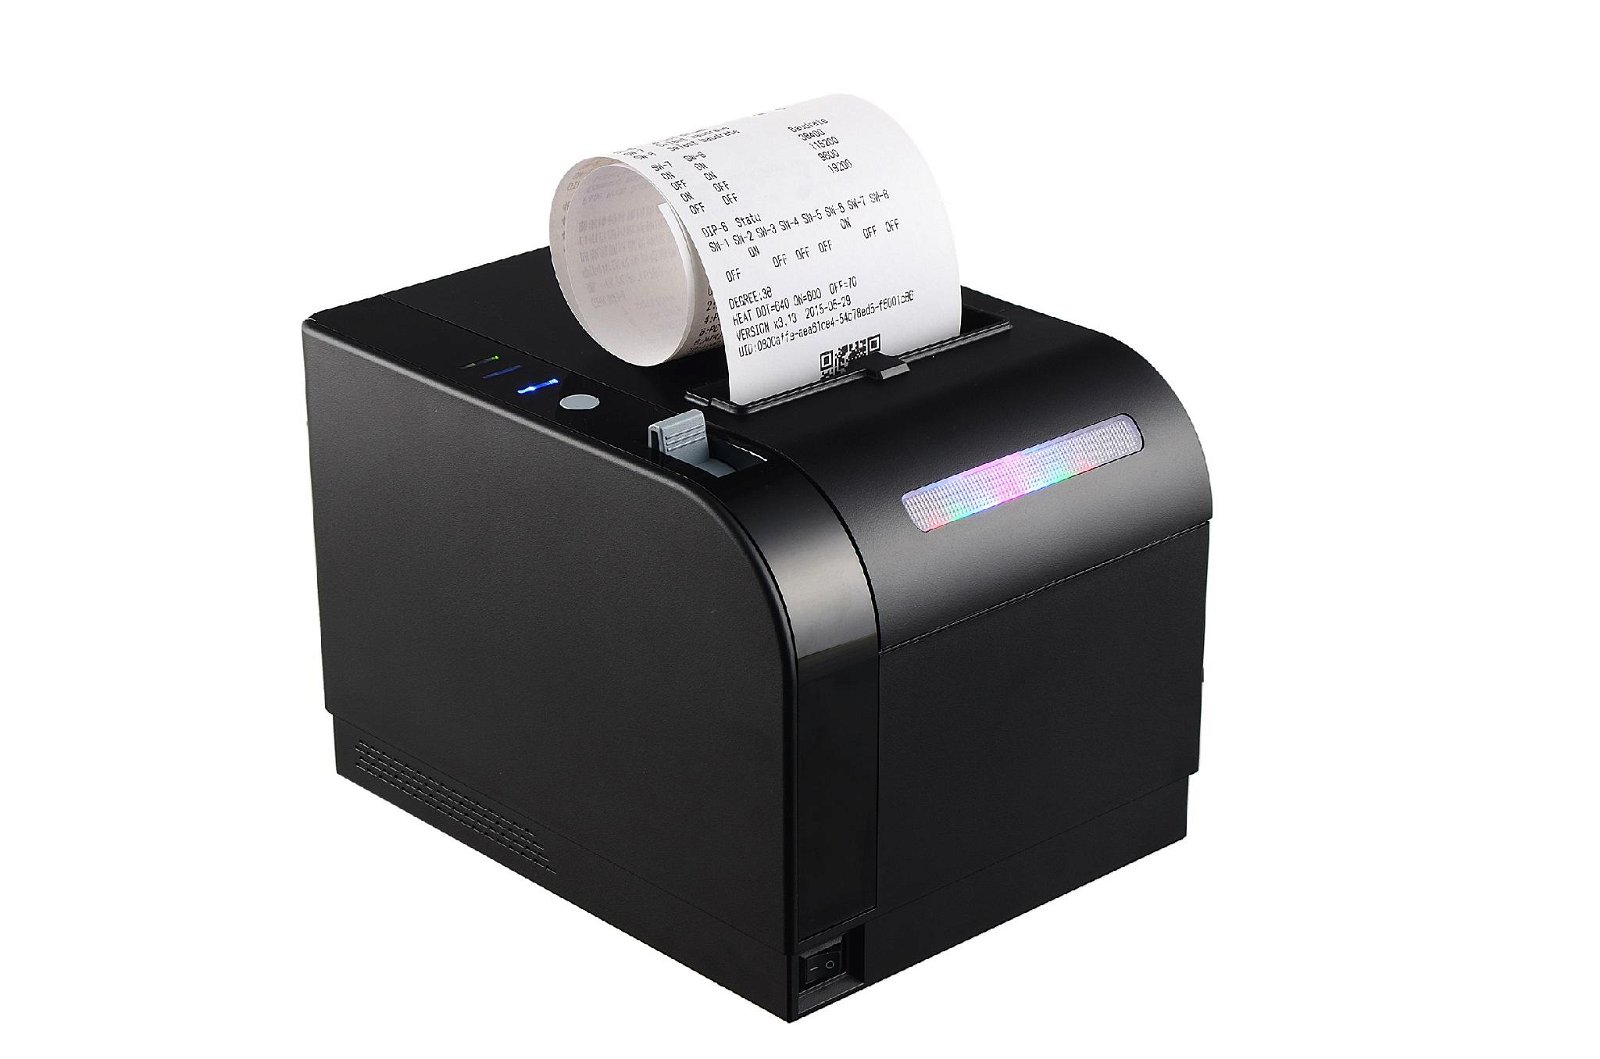 Rongta 300mm/s high printing speed RP820 80mm thermal printer